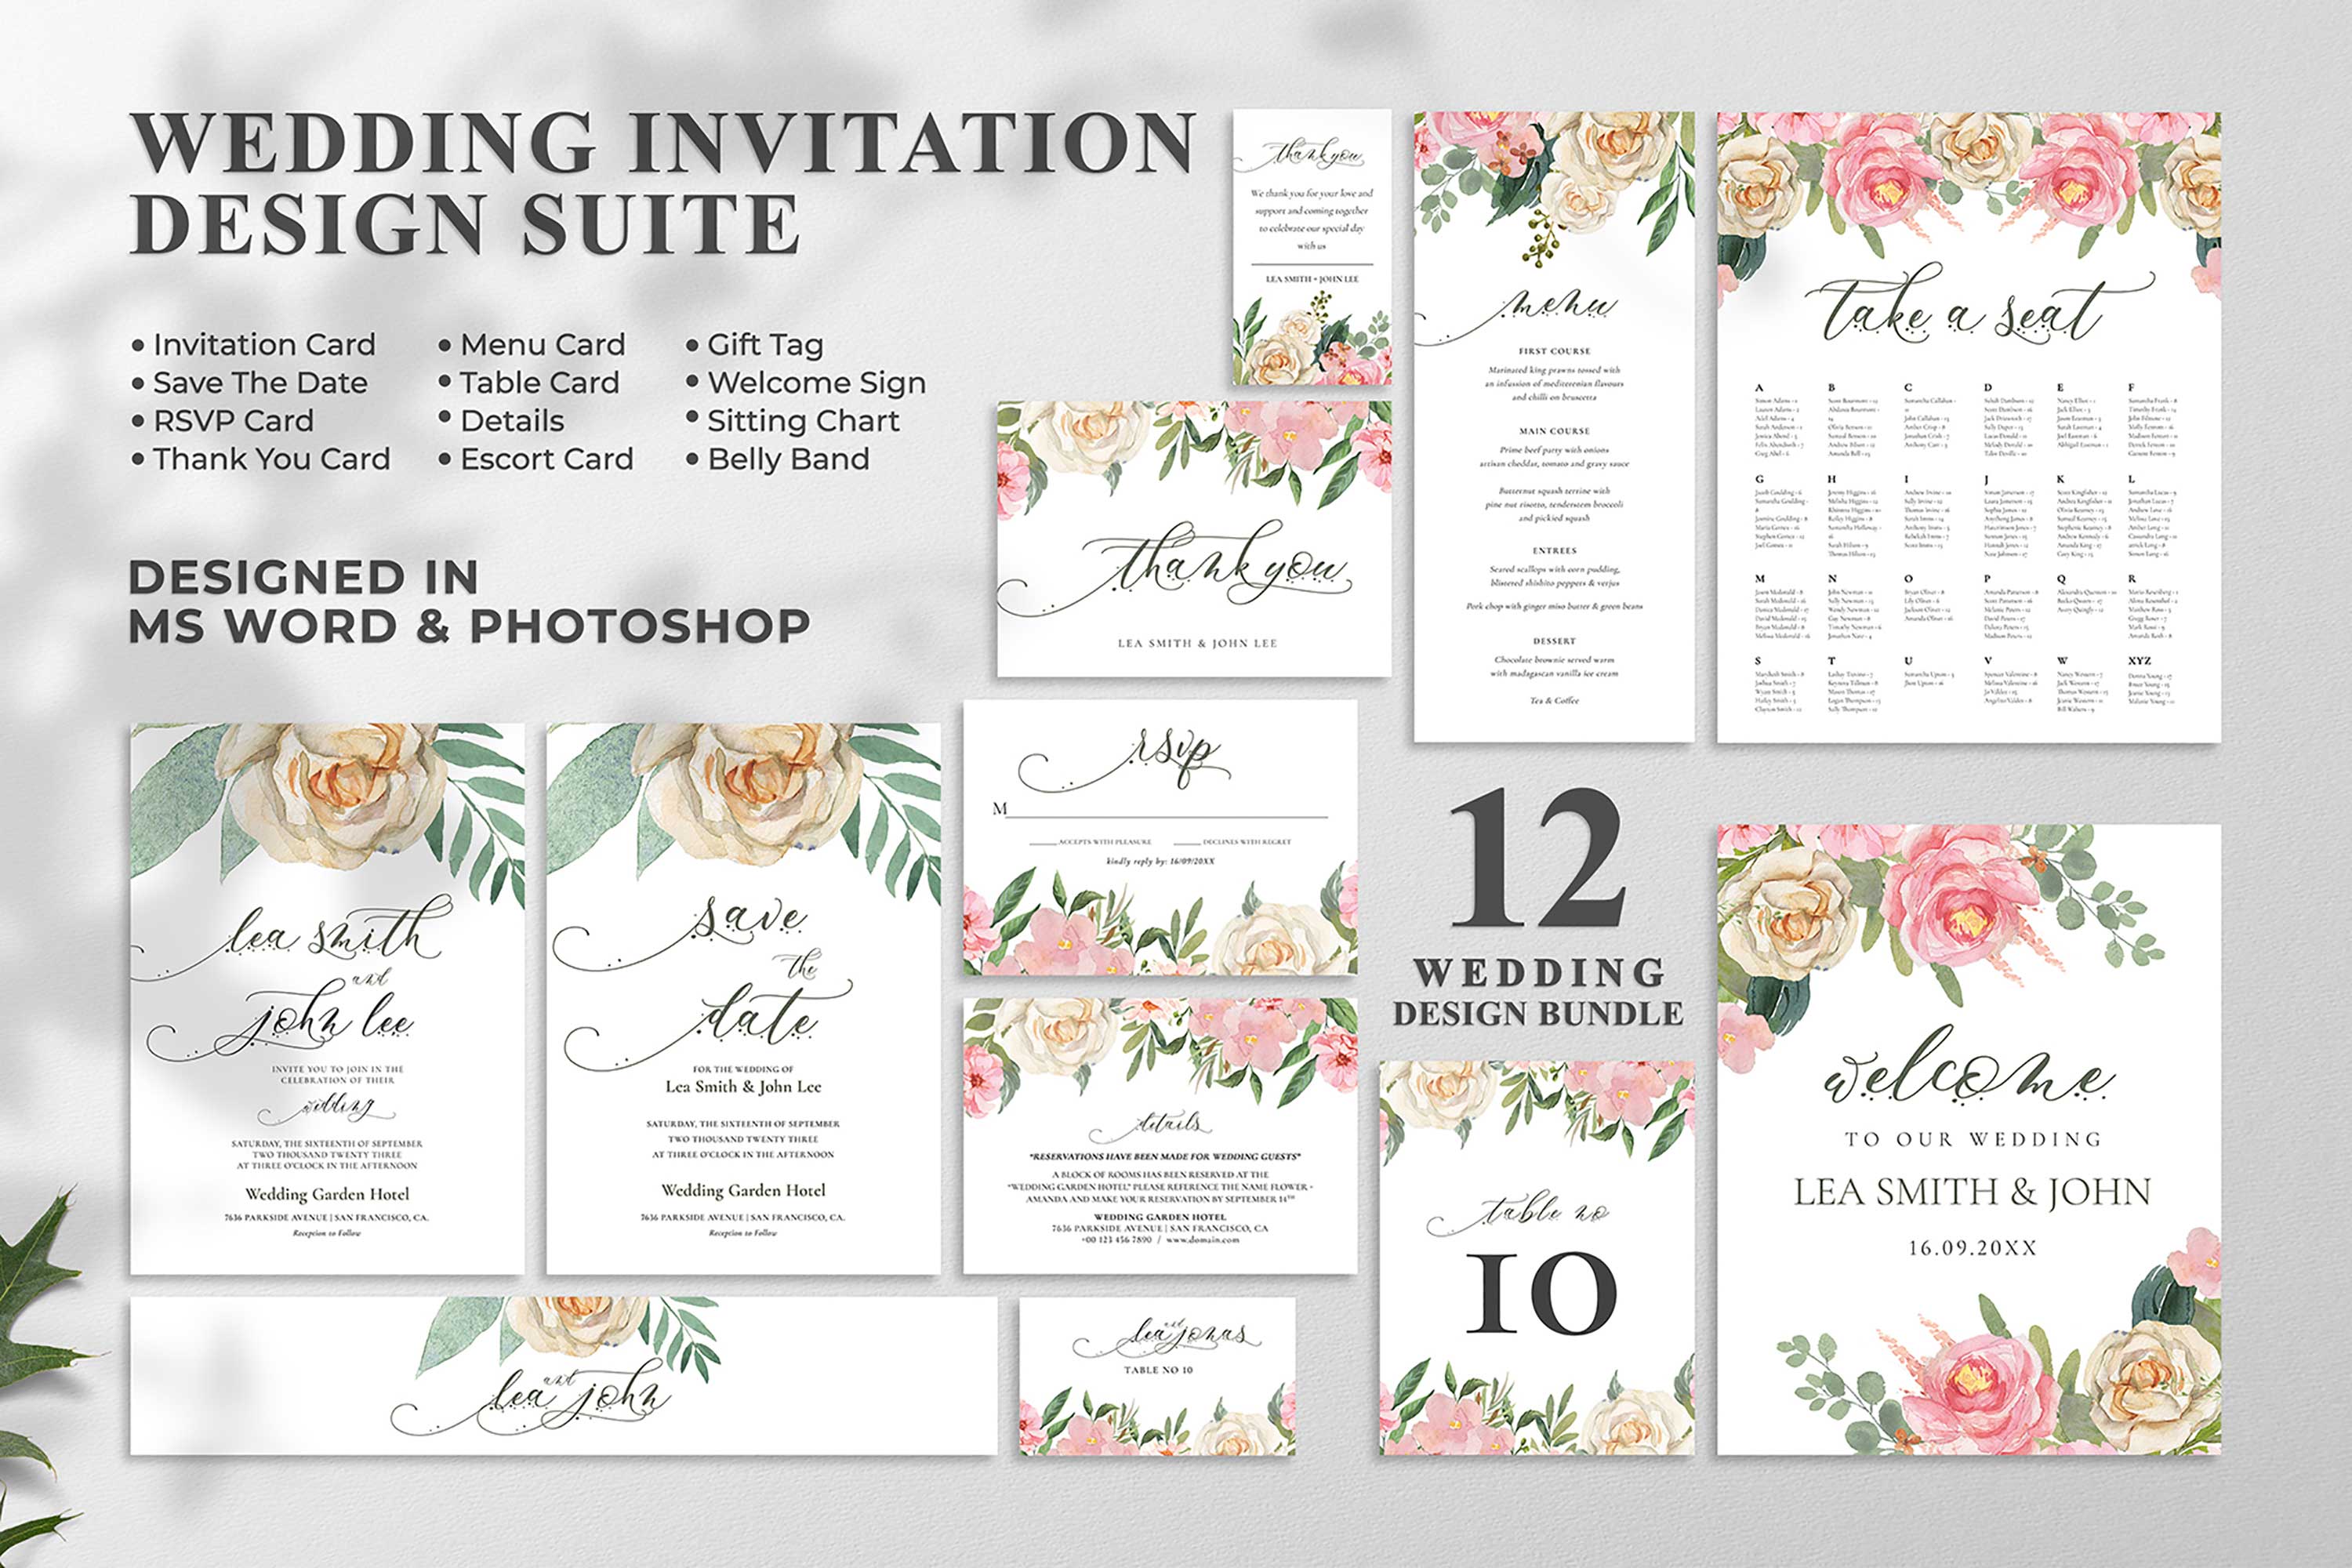 Your guests will be impressed be these invitations.